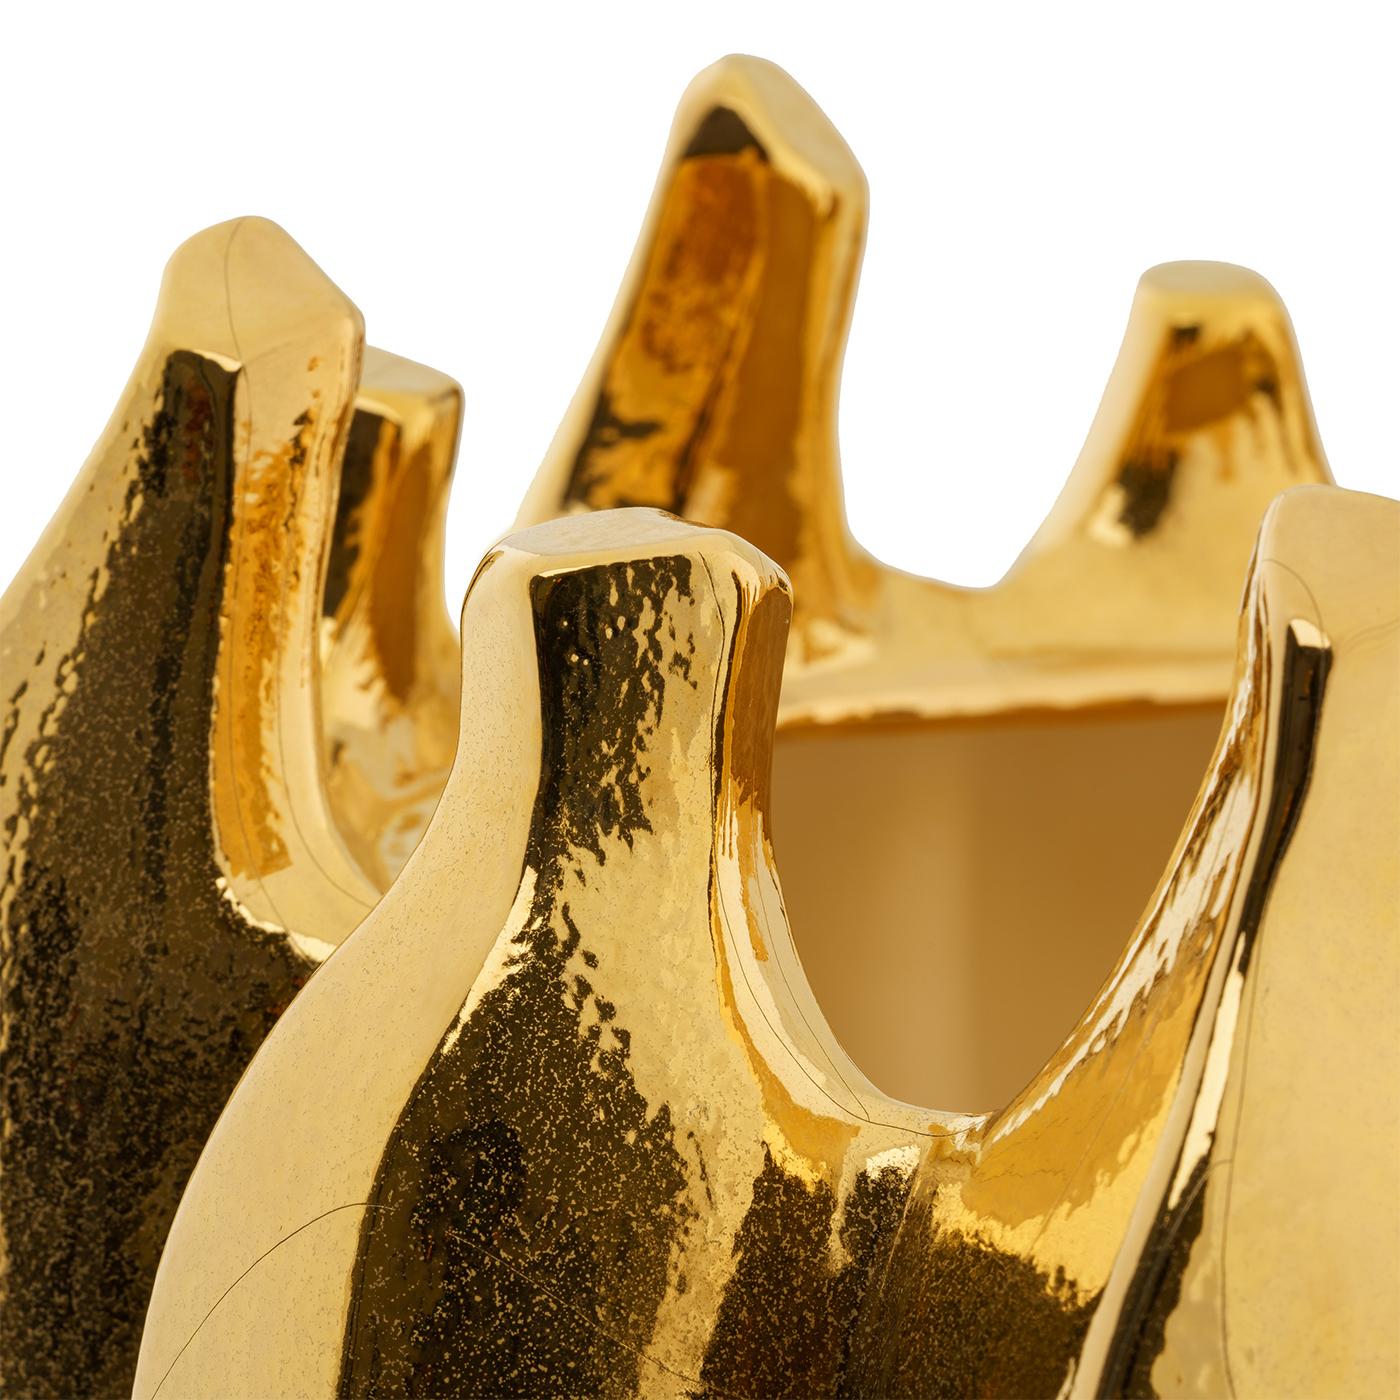 This splendid vase will add a luminous character to a refined entryway or living room decor, thanks to sublime craftsmanship and singular design. Handmade of ceramic, its grooved, rounded silhouette is finished in a polished gold hue that enhances